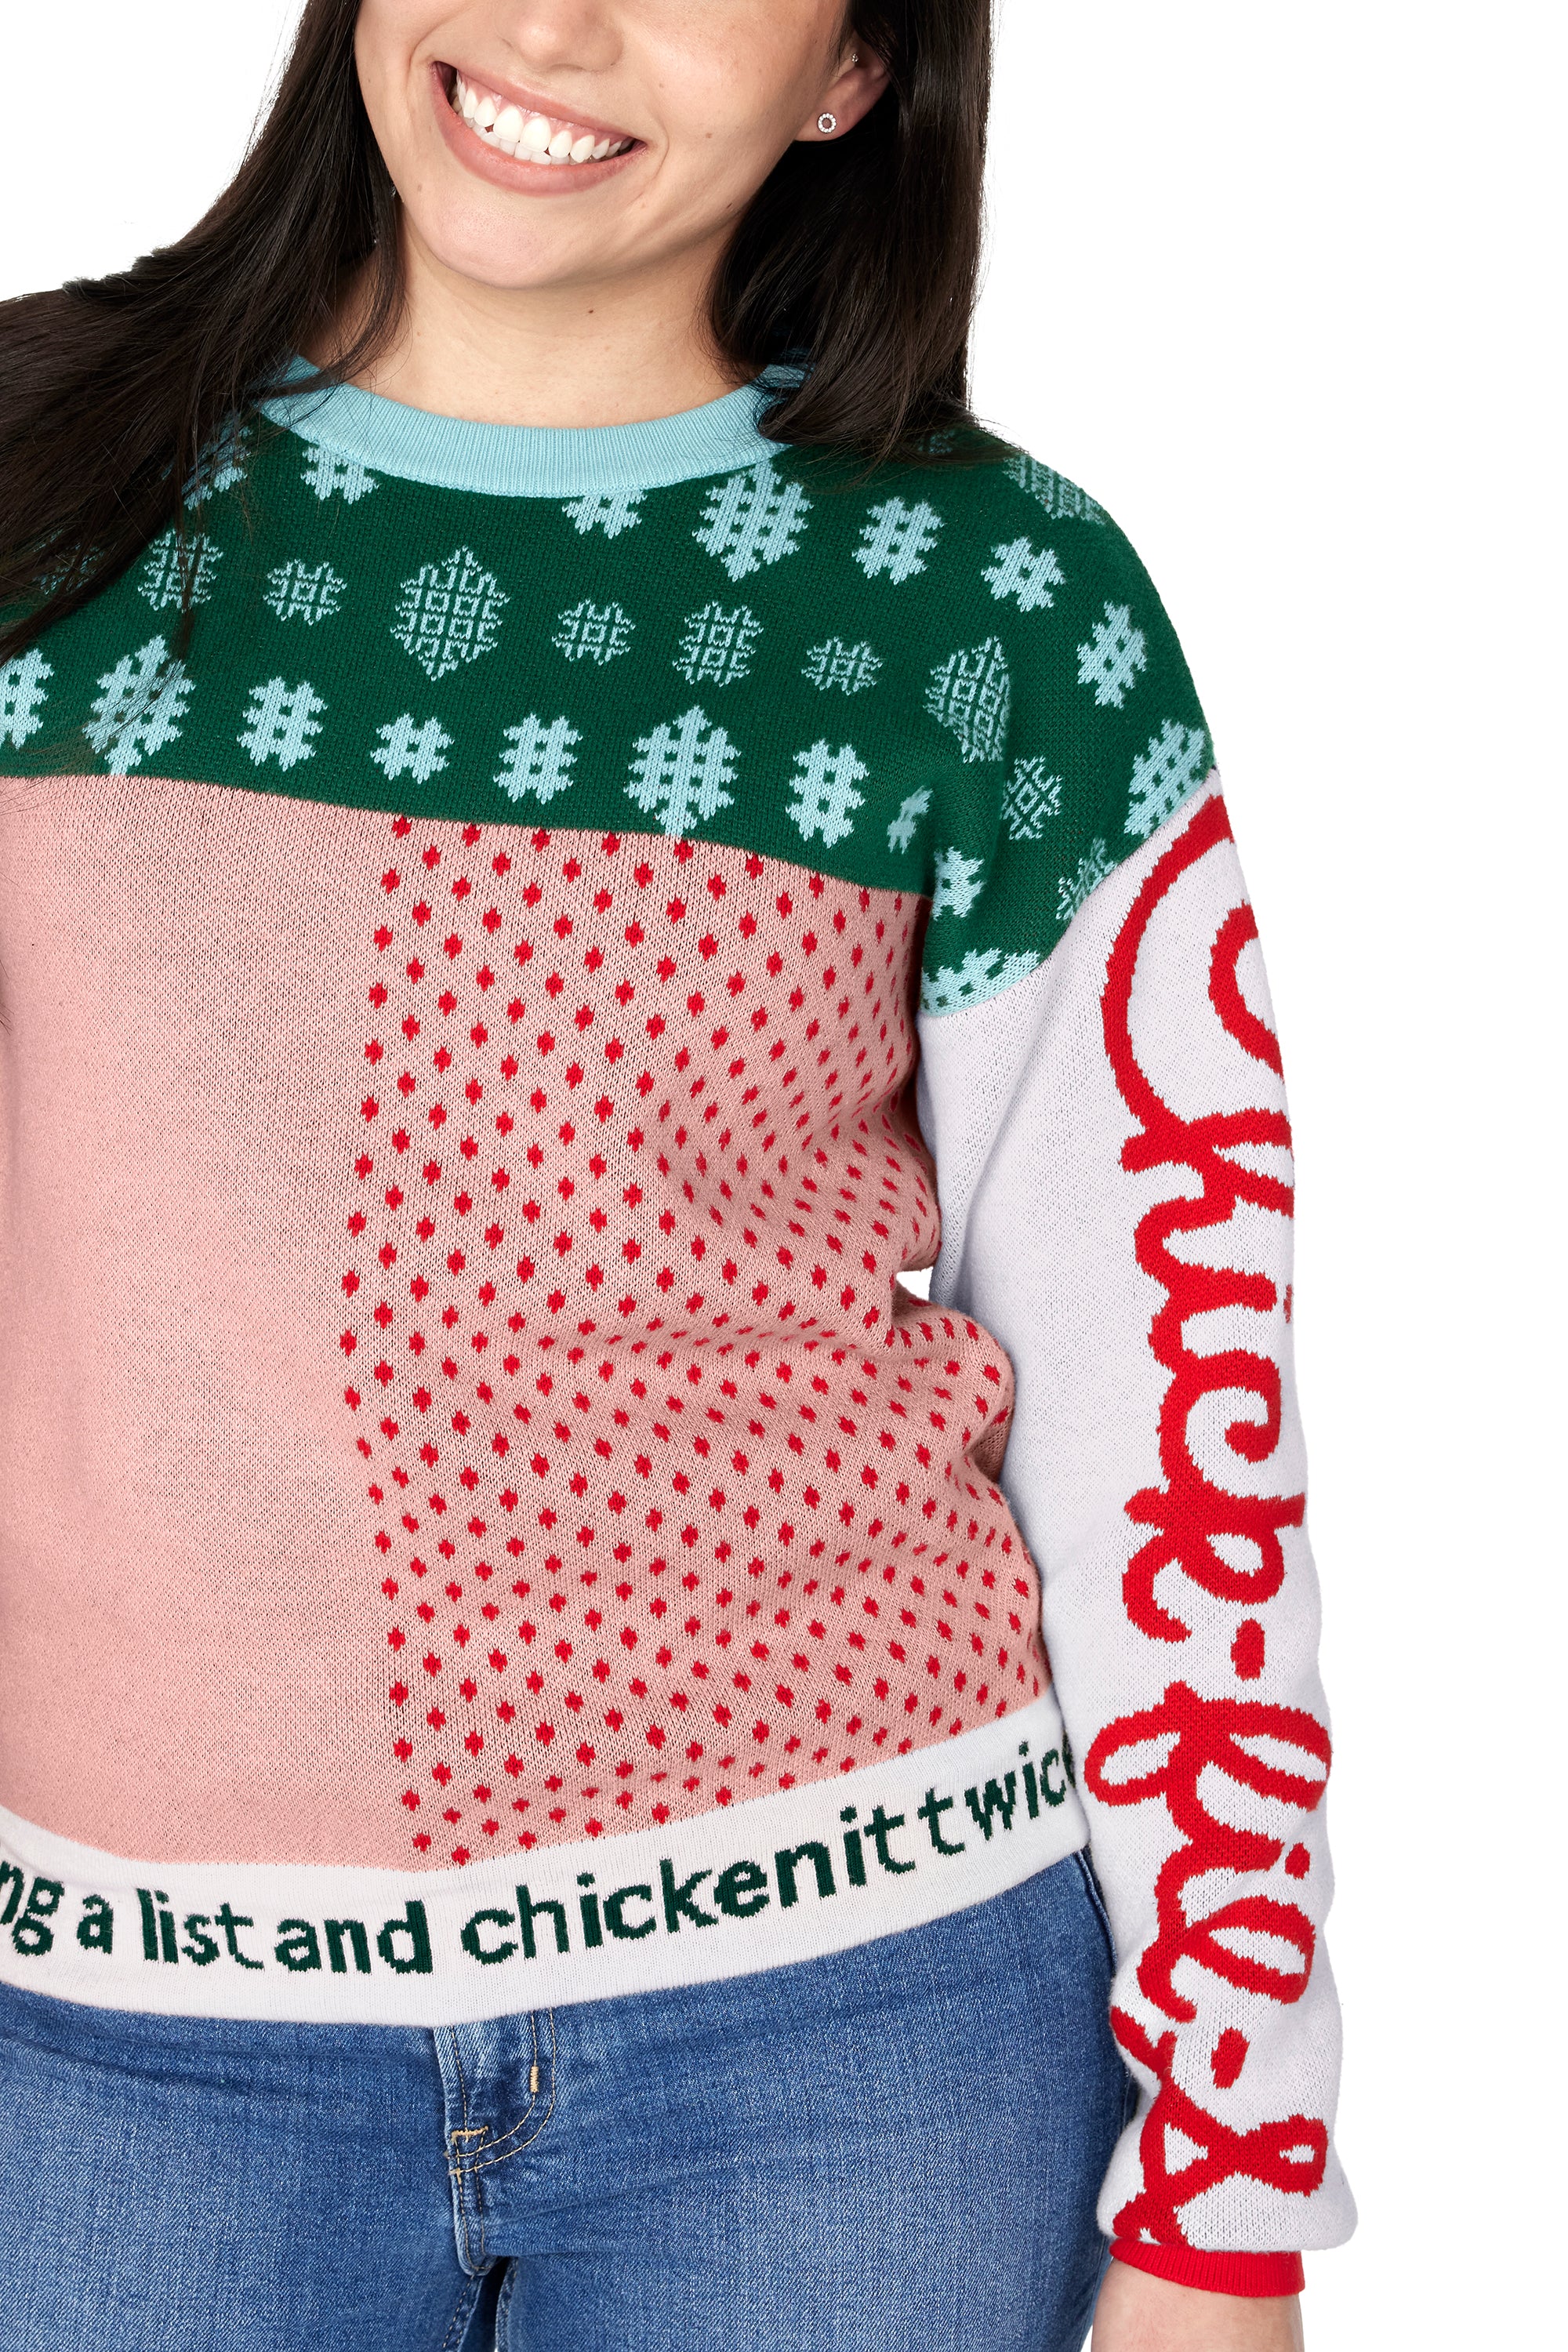 Woman wearing Festive Fun Knit Sweater showing off “Making a list and chicken it twice” waistband